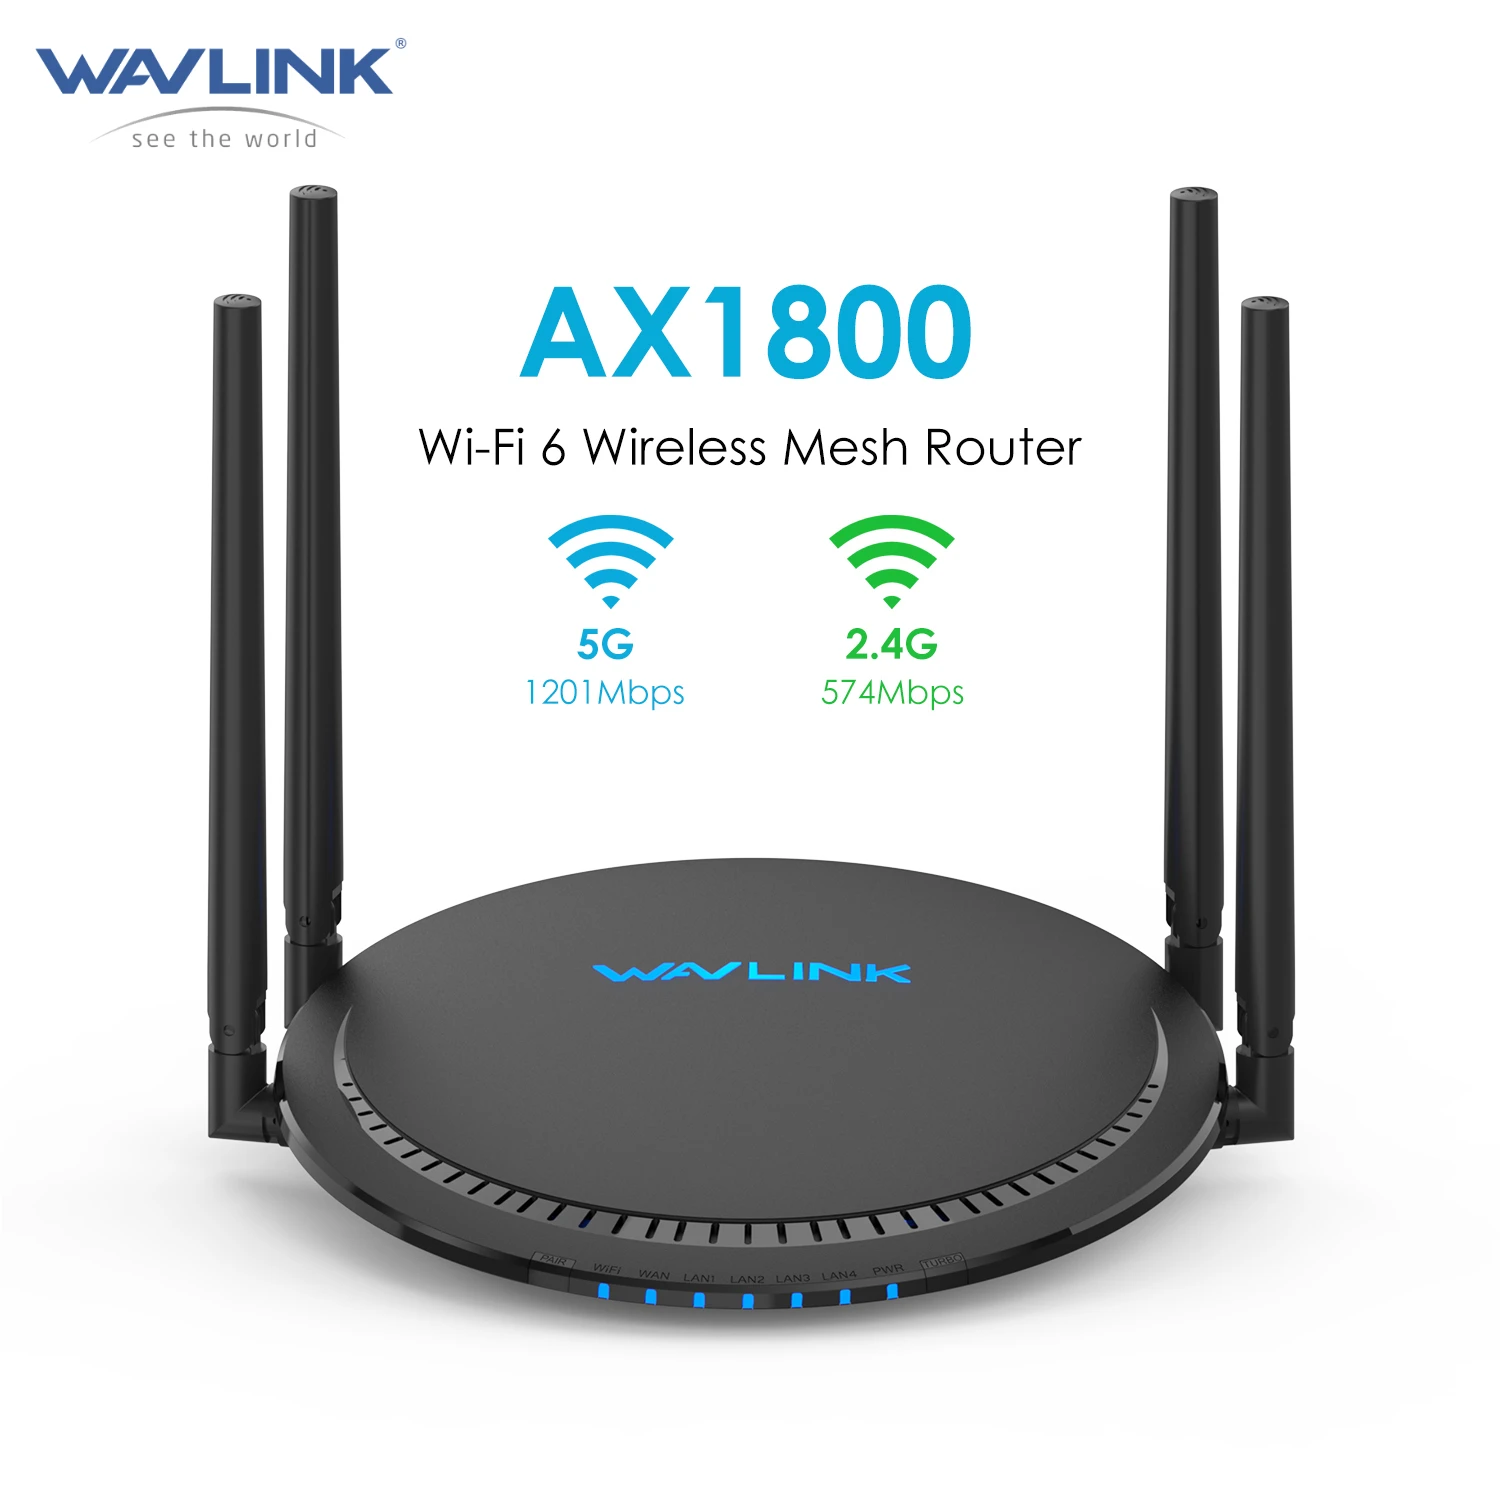 Wavlink AX1800 WiFi 6 Mesh Gigabit Wireless Internet Router-Dual Band 2.4GHz 574Mbps+5GHz1201Mbps Up to1500 Square Feet Coverage wi fi amplifier